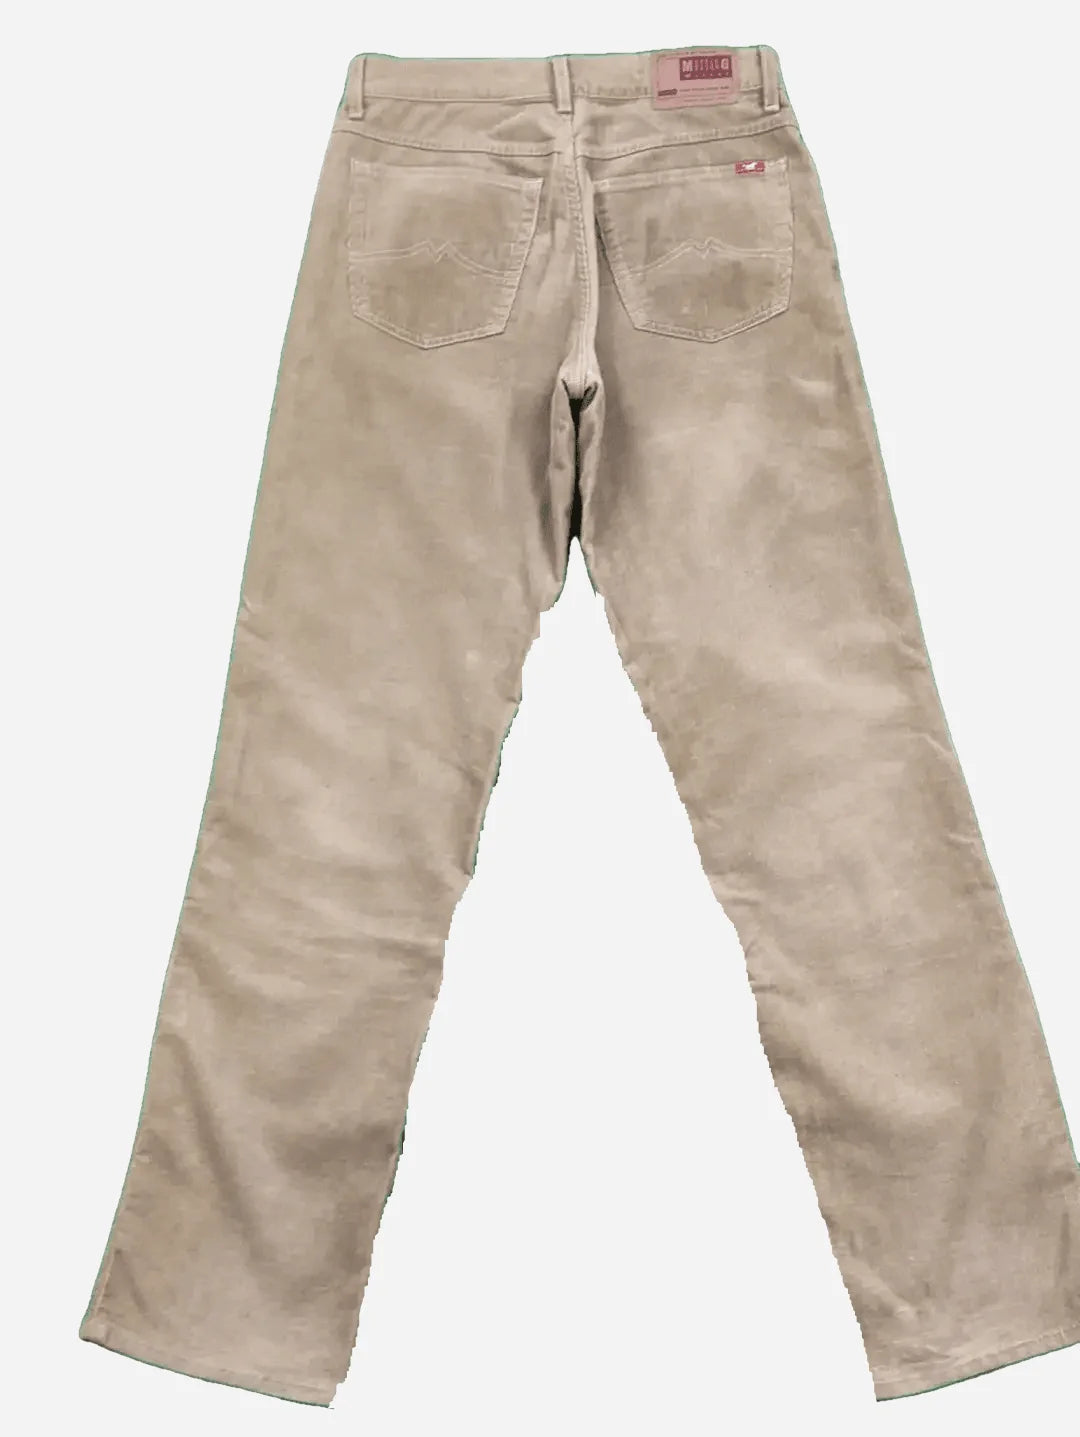 Mustang corduroy trousers 32/34 (L)